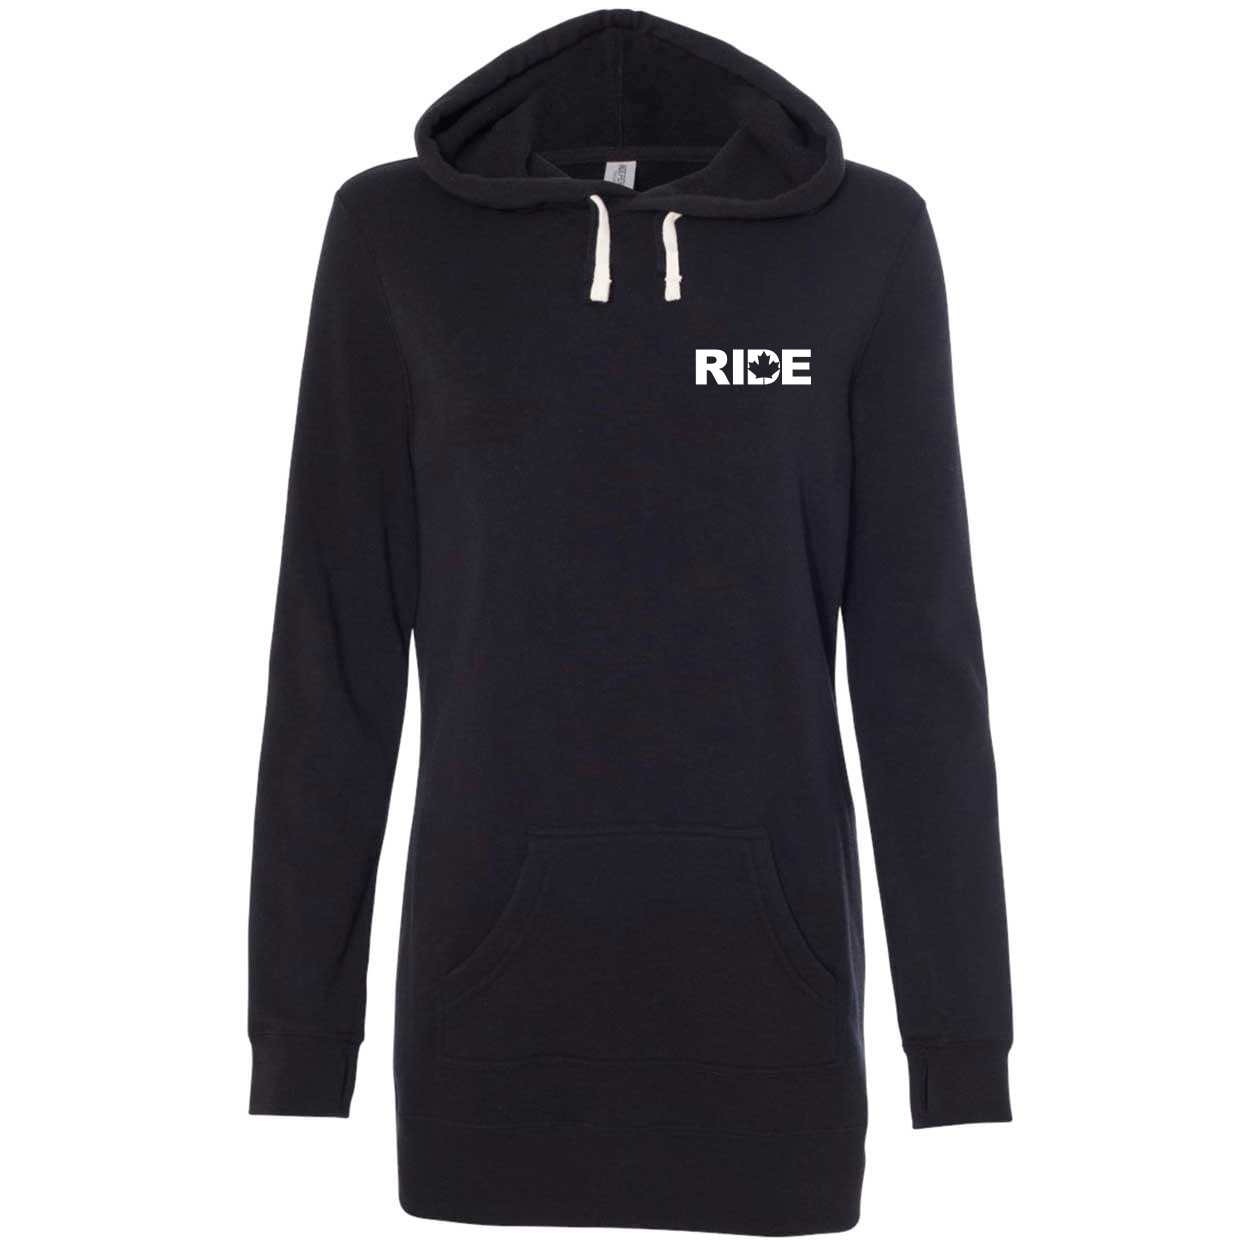 Ride Canada Night Out Womens Pullover Hooded Sweatshirt Dress Black (White Logo)